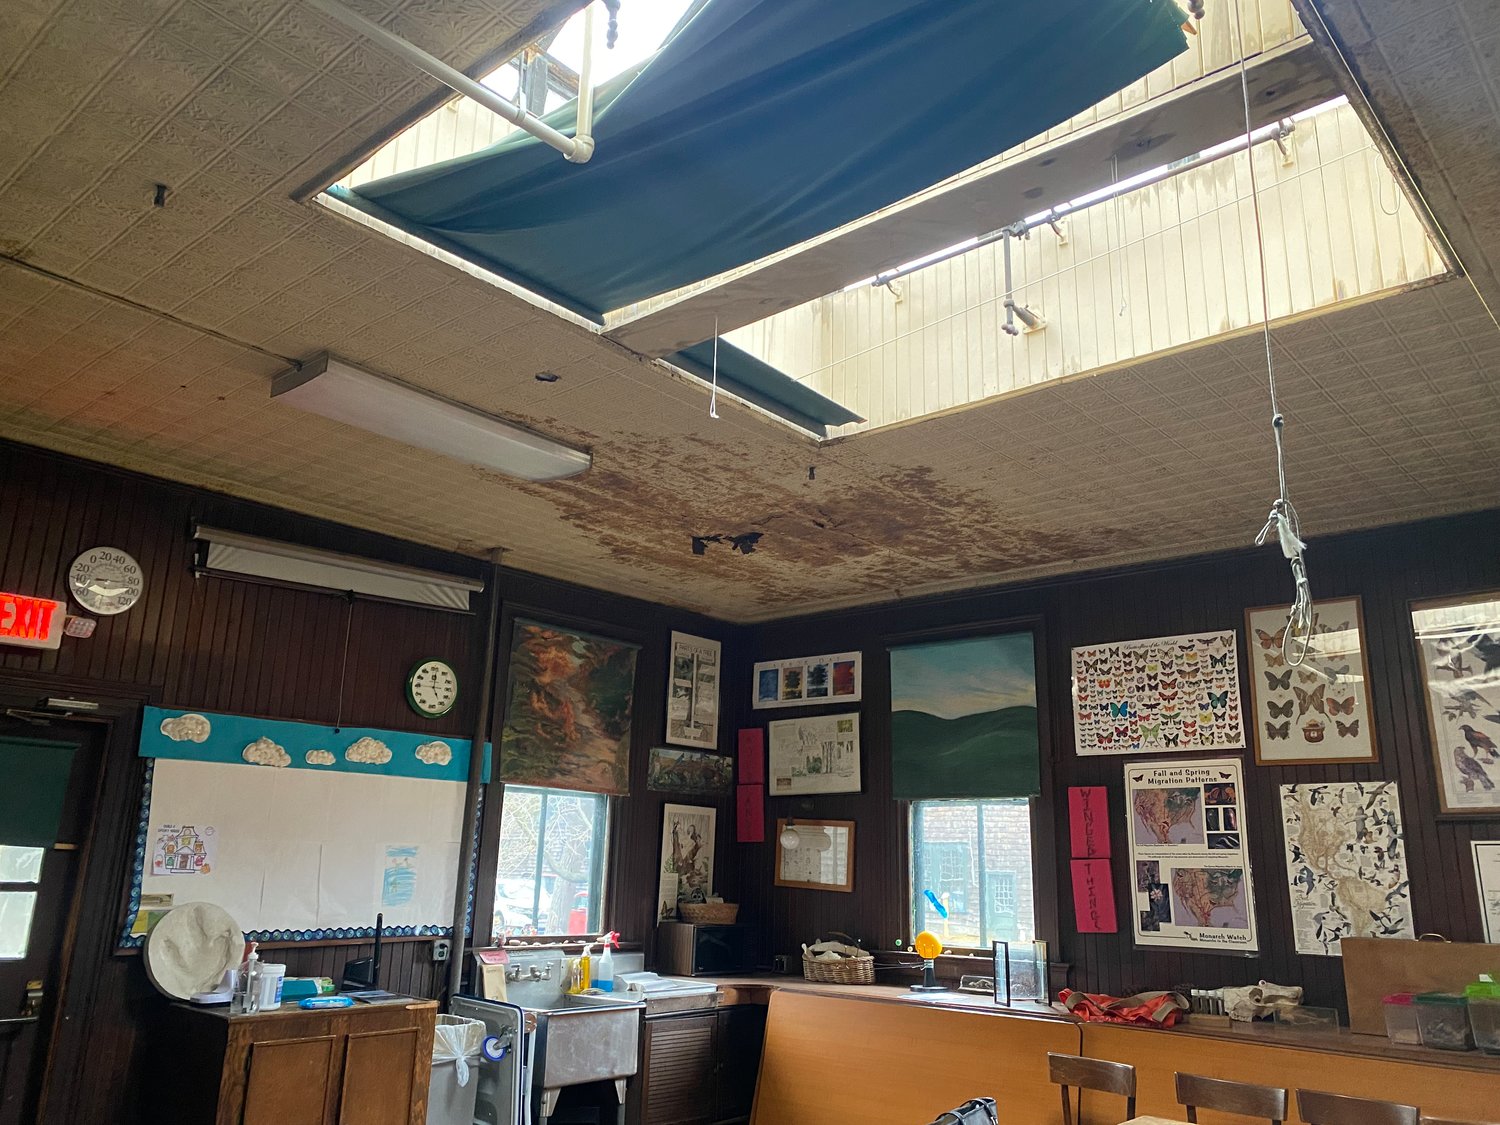 The skylight of the fish preparation room is in need of repair.